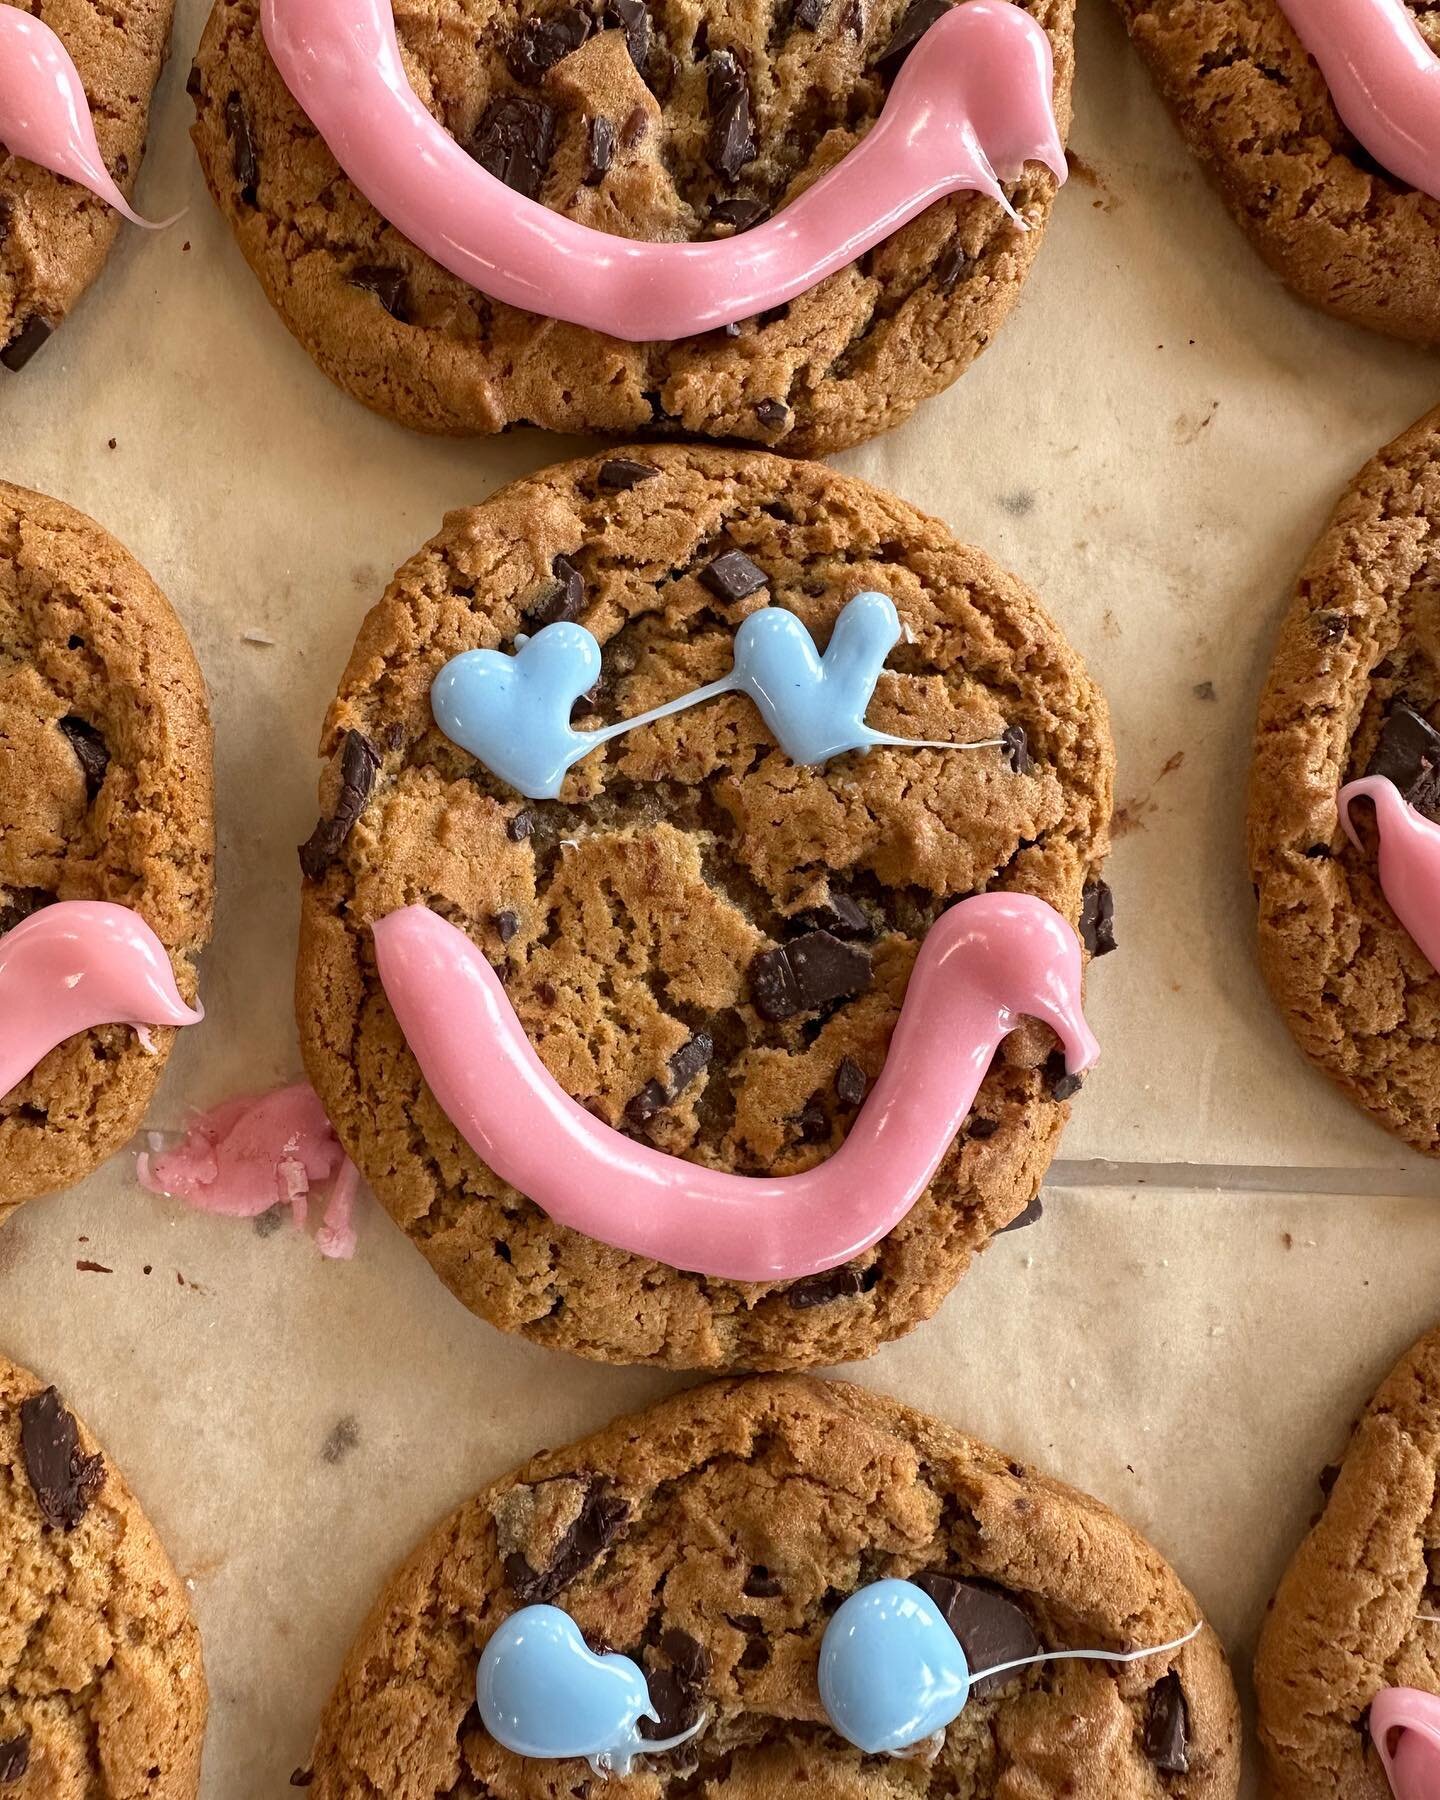 Day 2 of Smile Cookie &amp; we have some exciting news &hellip; ⬇️ 

🍪 one of the Stratford Tim Hortons is currently ranked #3 in the region for cookies sold! Can we make them #1?! 
🍪 day 1 saw over 6000 cookie sales 

➡️ want to order in bulk? Pre